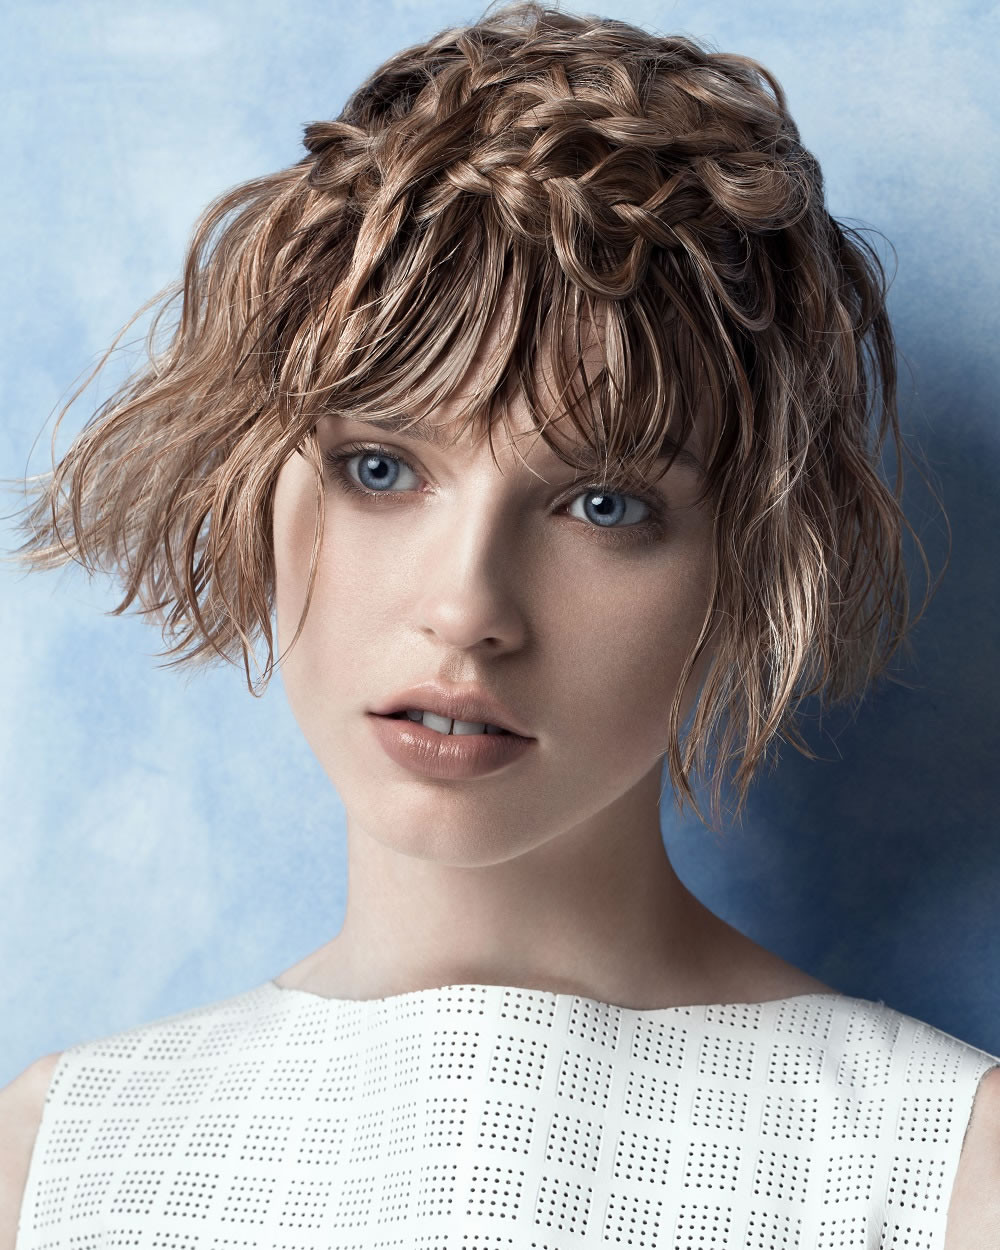 Haircuts For Girls 2019
 2018 Spring Short Haircut Summer 2019 Pixie Hairstyle for